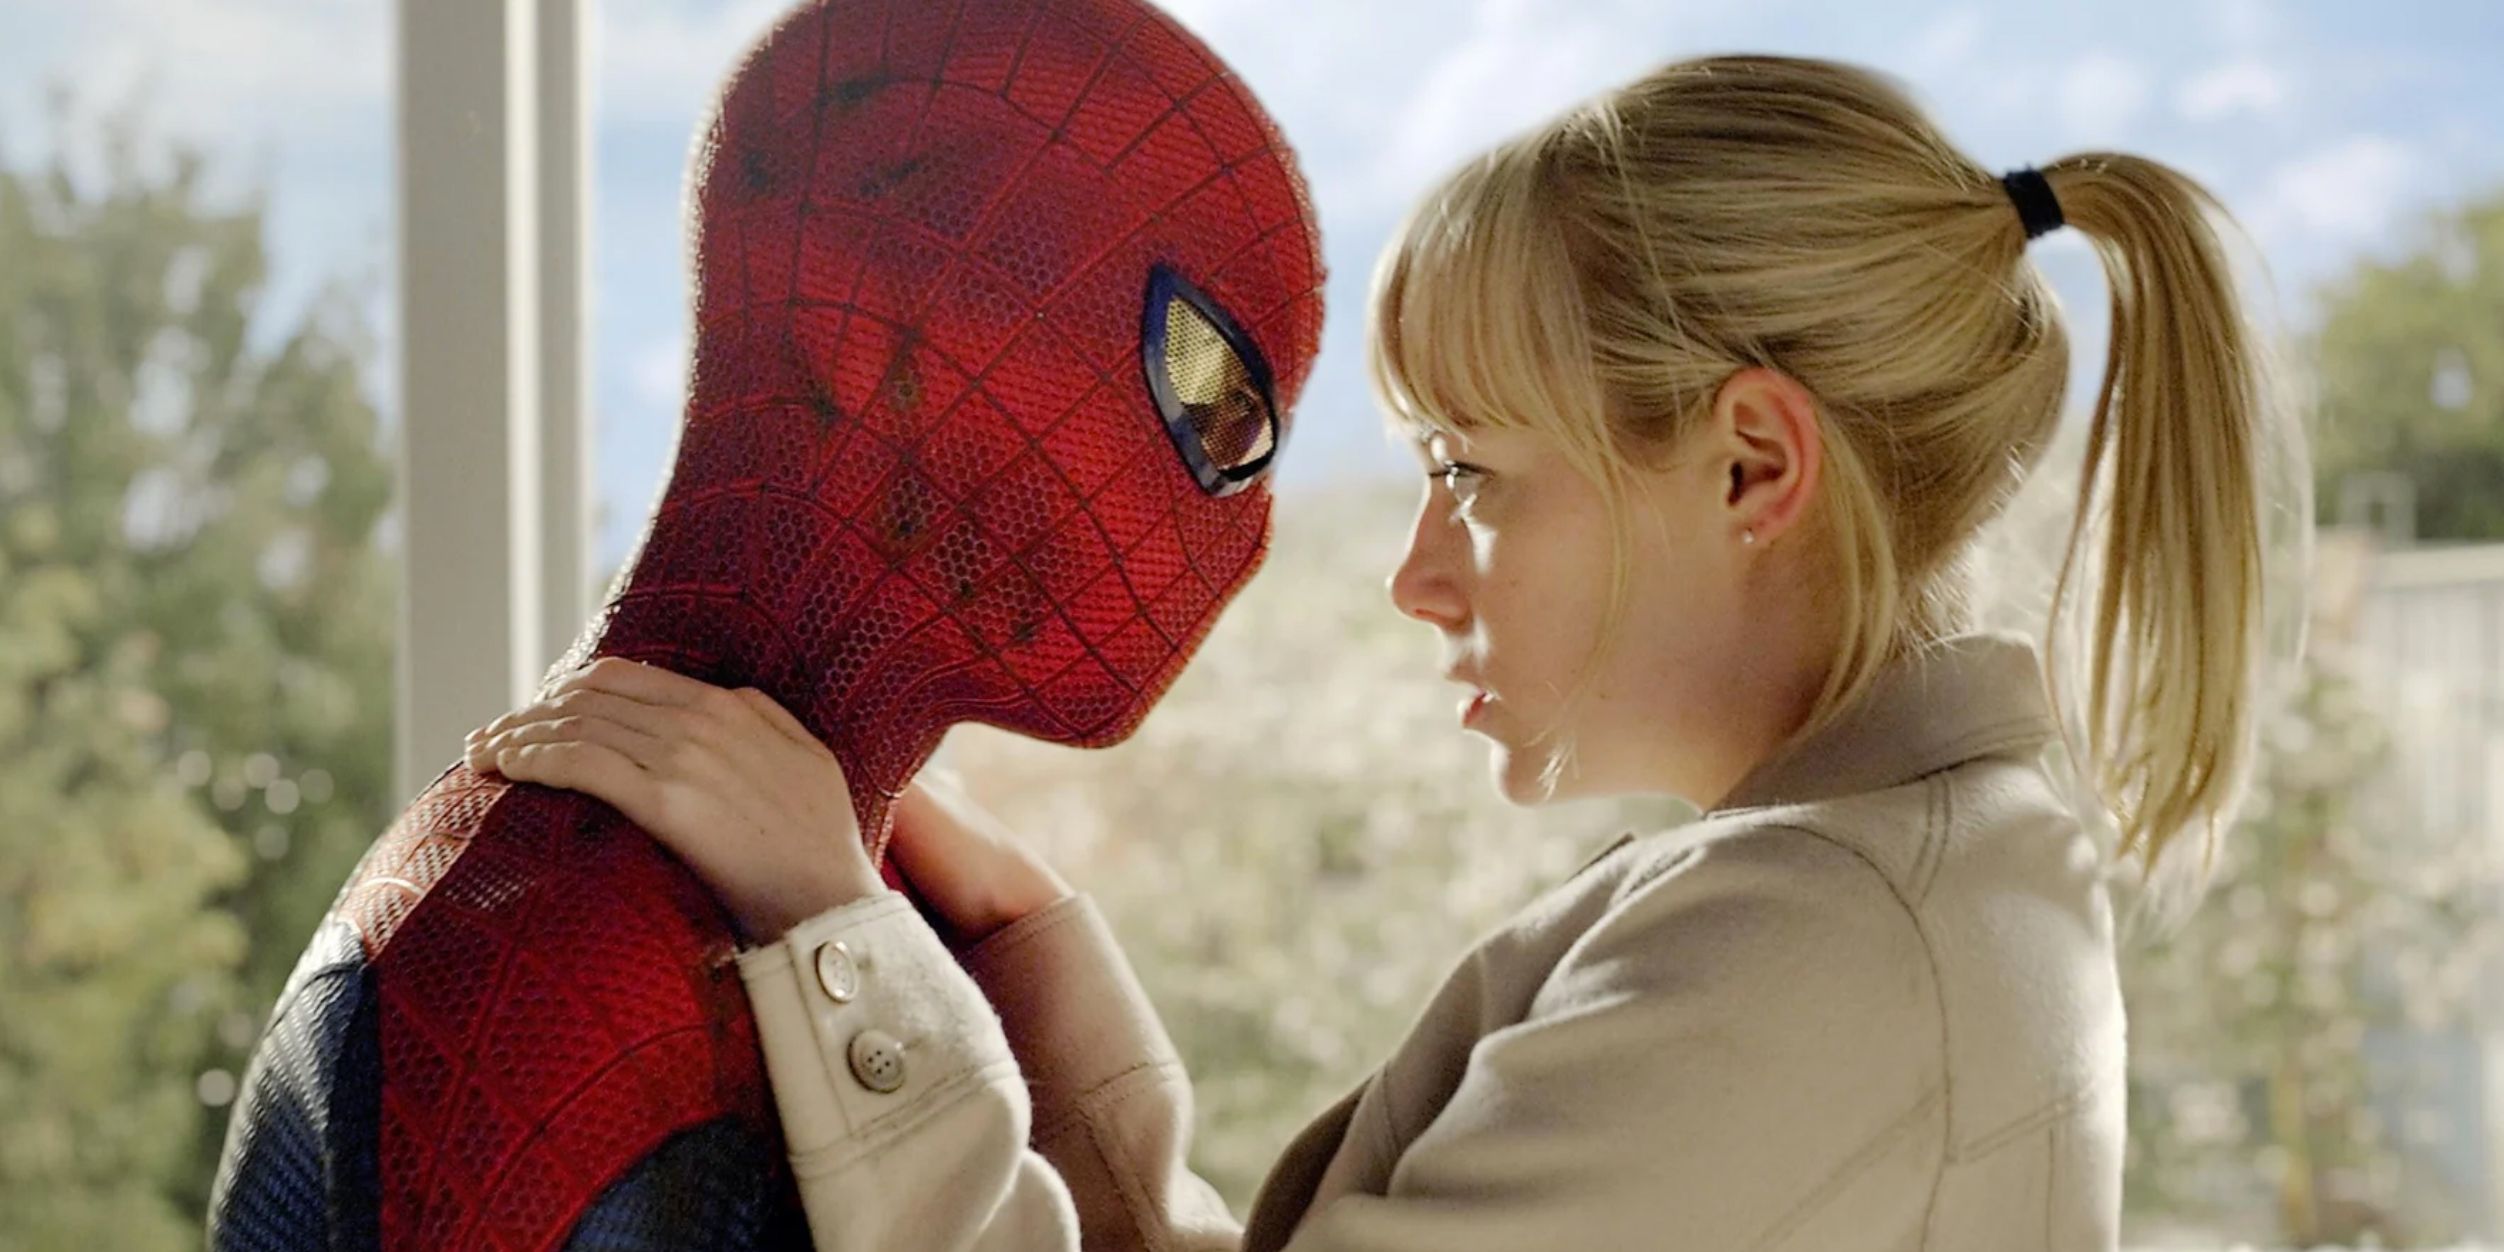 Andrew Garfield’s Spider-Man Reunites With Gwen Stacy In NWH Fan Art